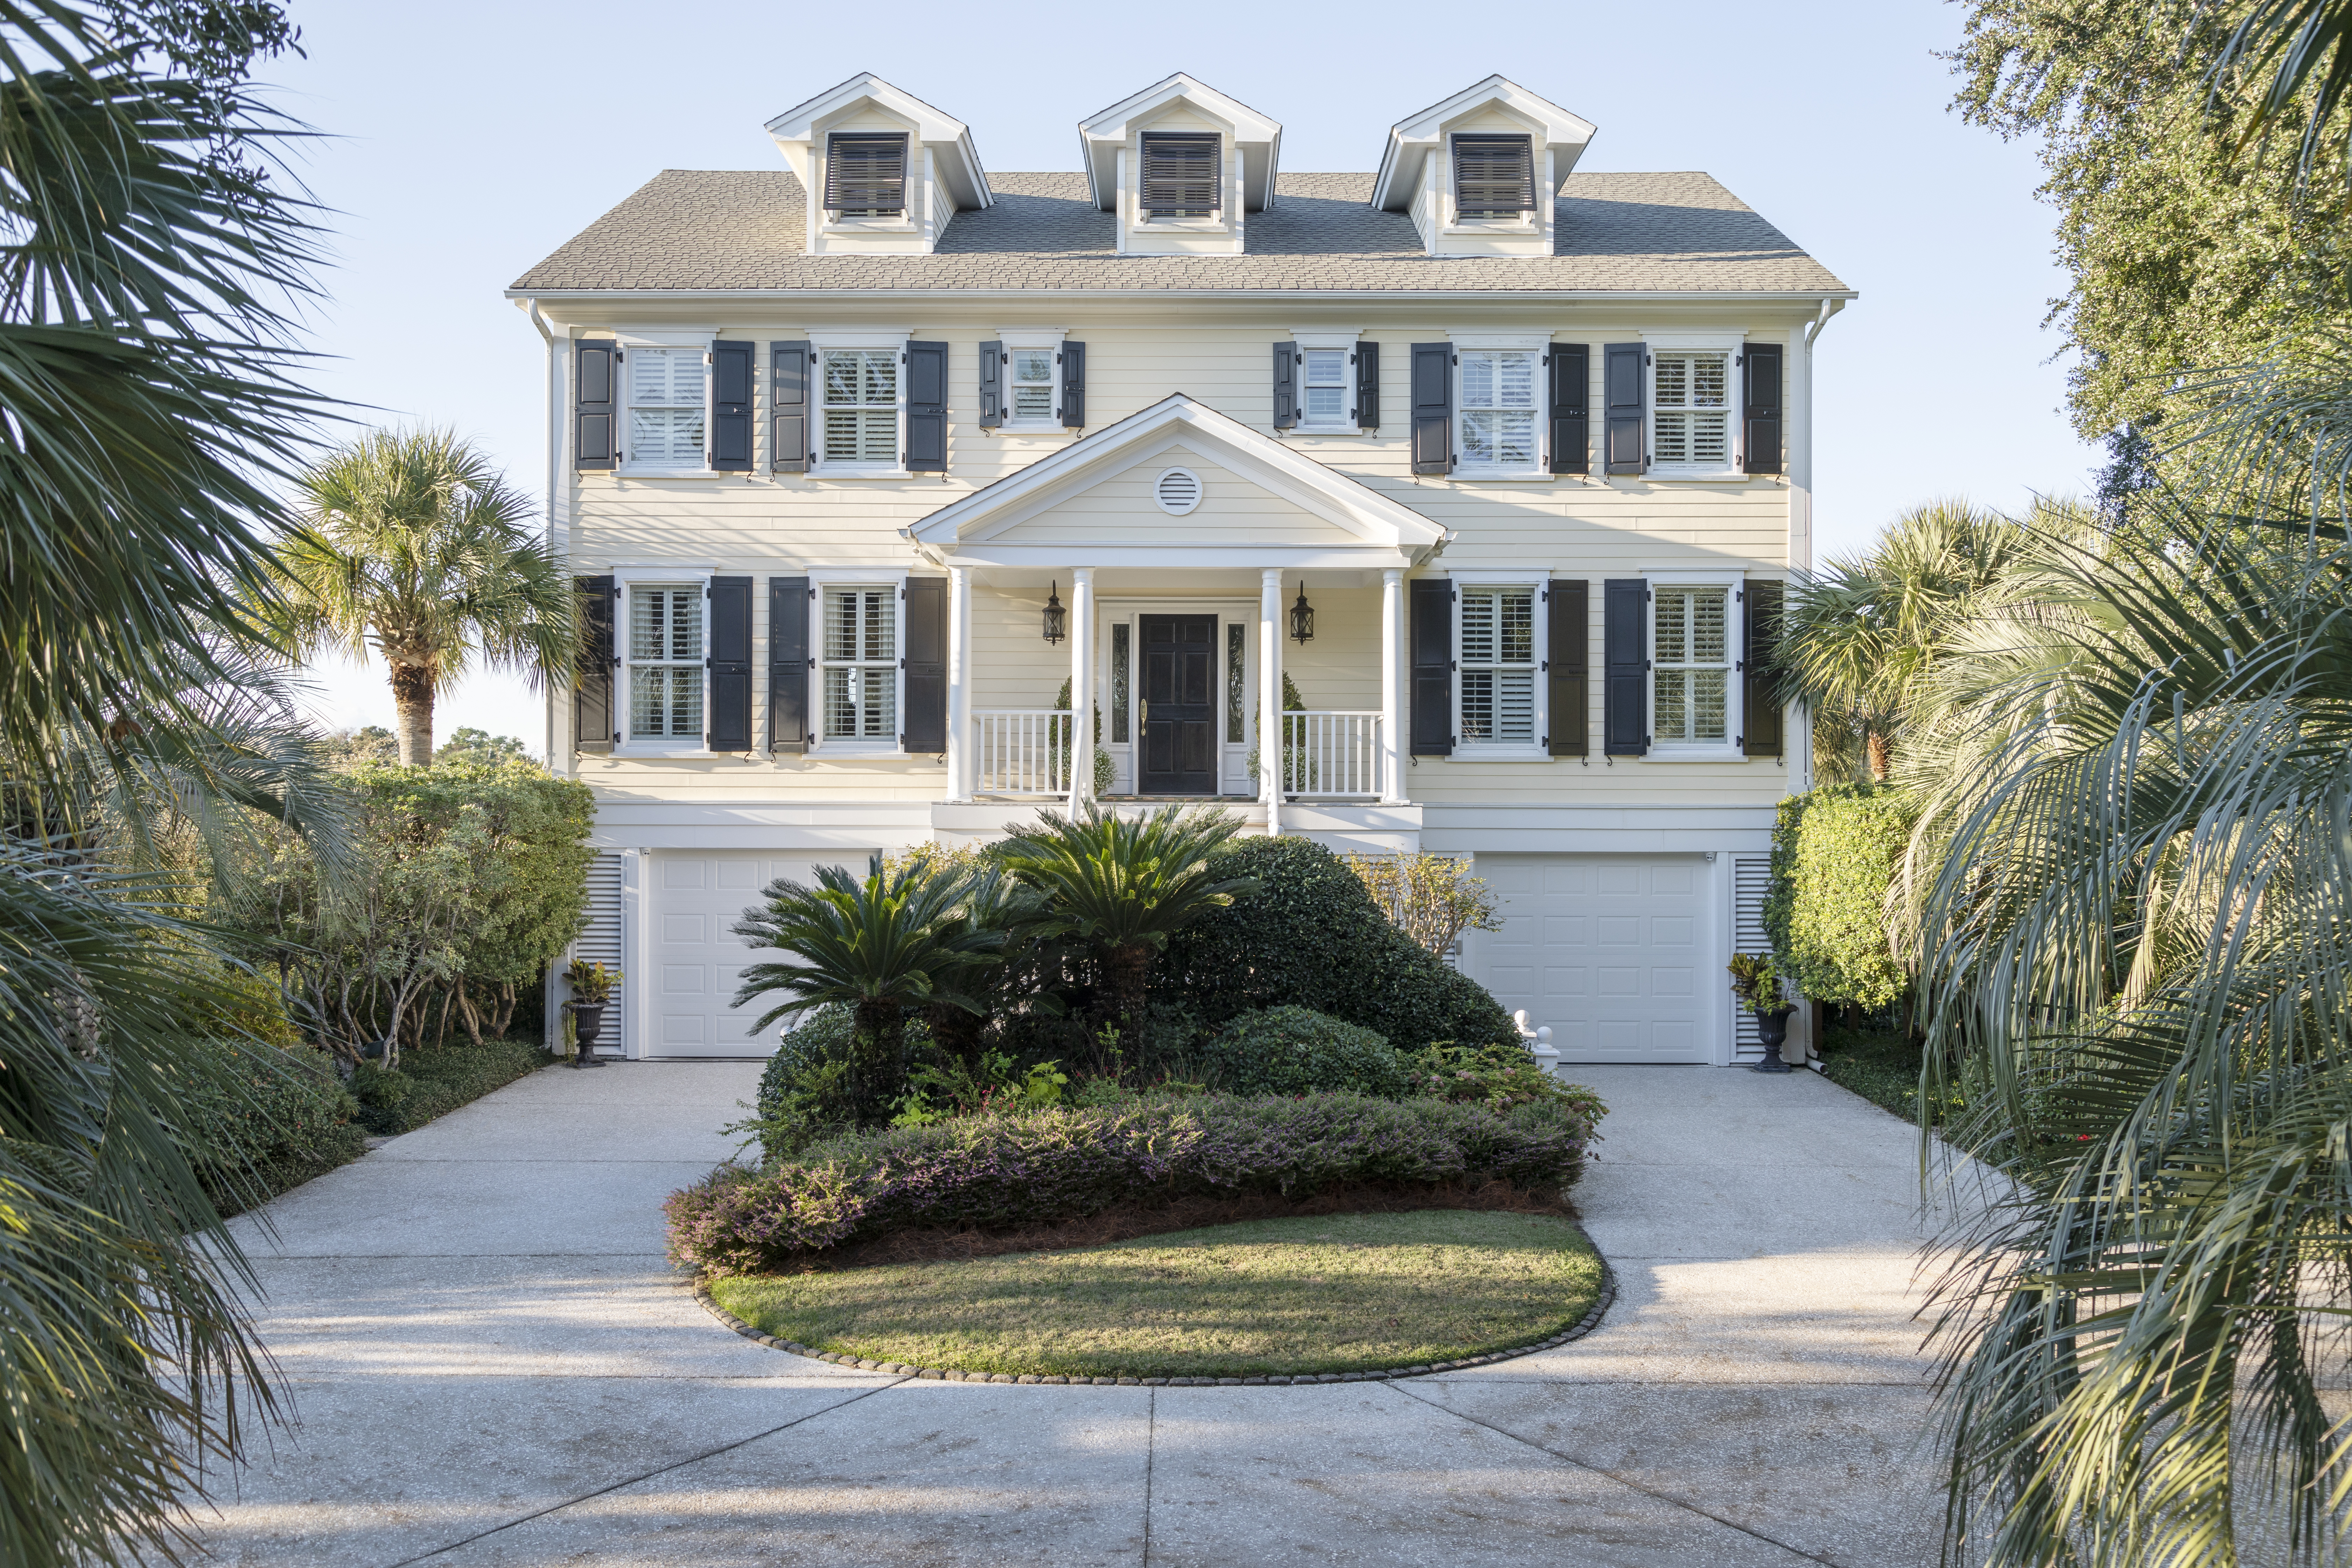 WHAT’S OLD IS NEW AGAIN: After 30 years of family life, the Rama residence, situated on the back side of Isle of Palms, was in need of an update.